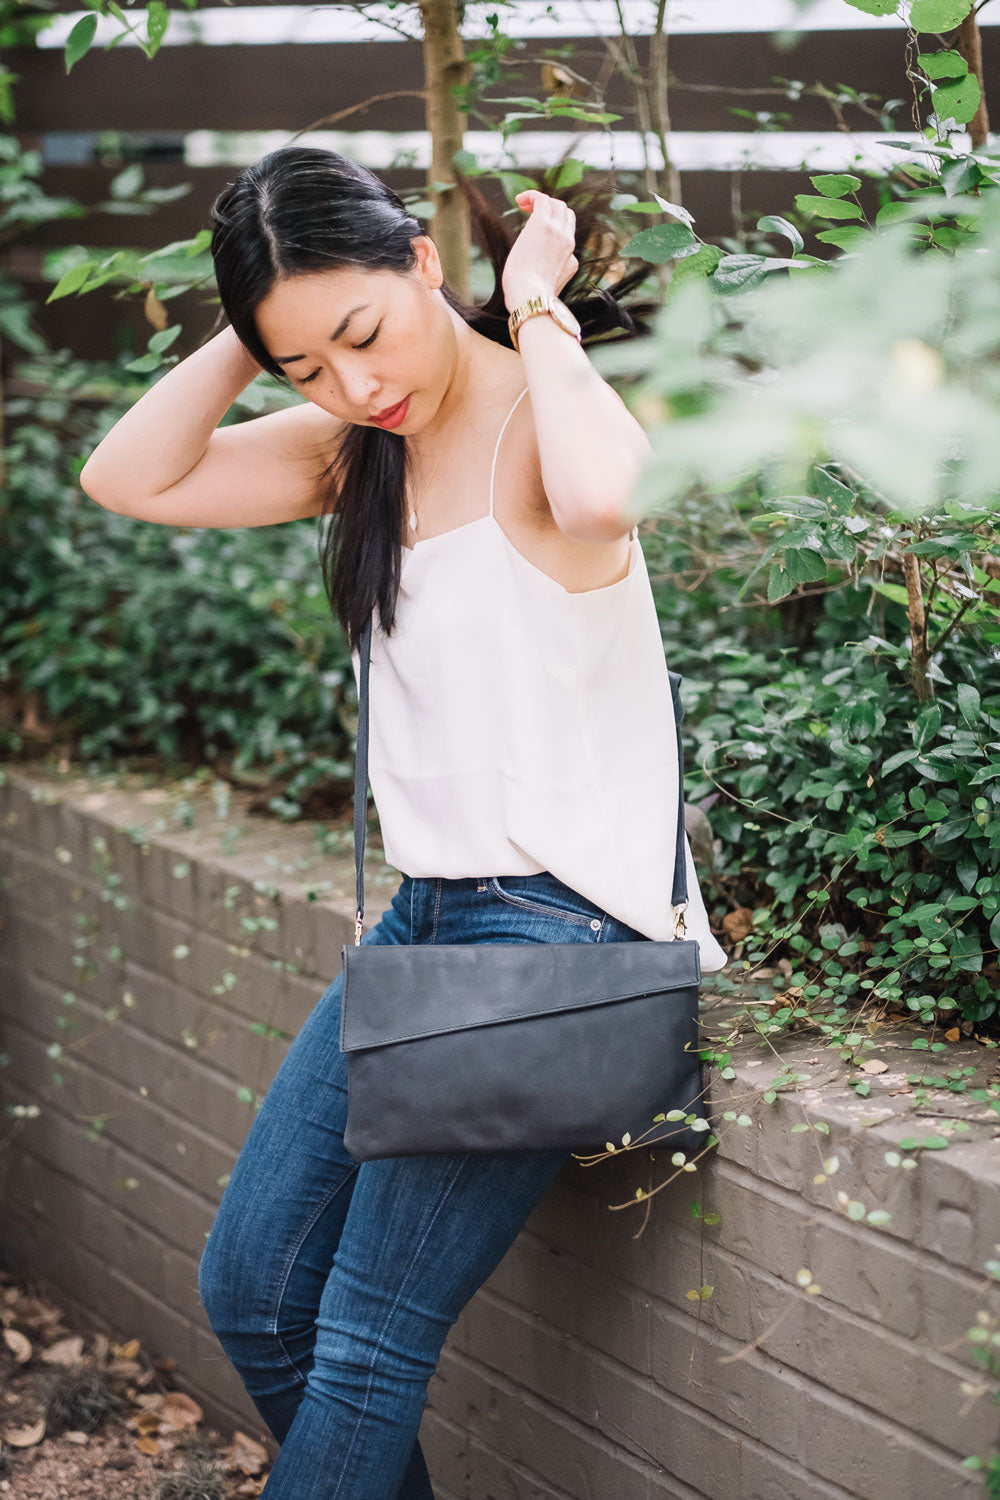 Ethically handmade convertible crossbody and clutch